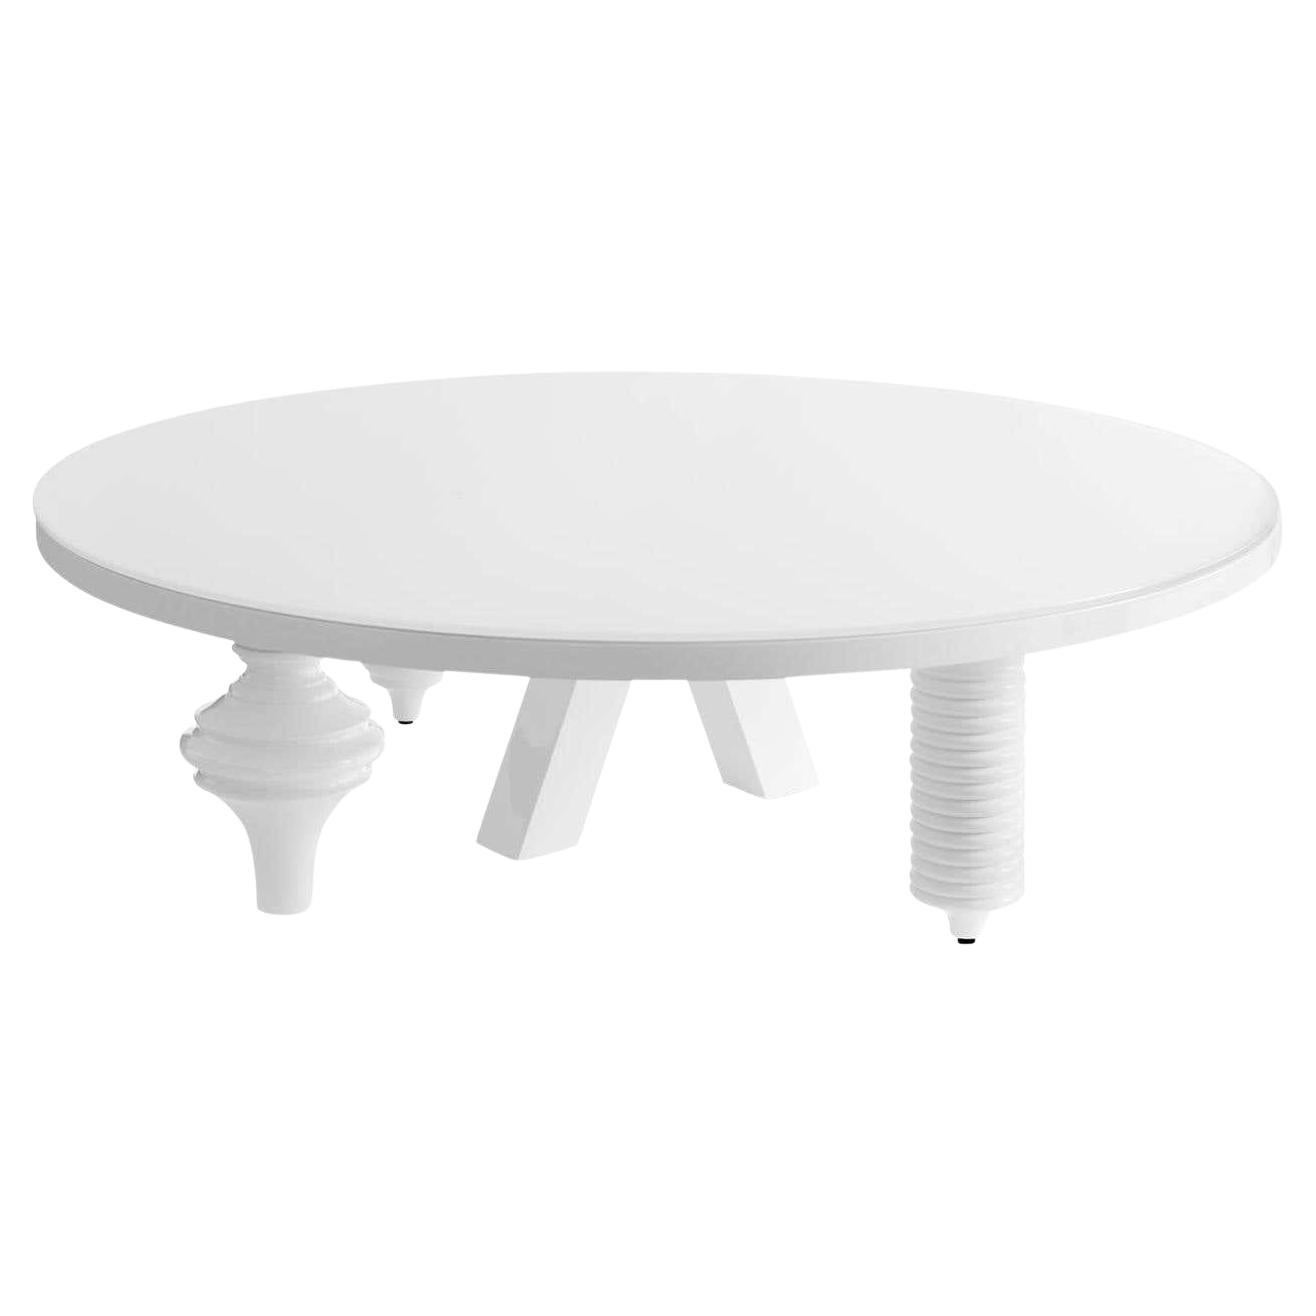 White Multi Leg Low Table High Gloss with Glass Top For Sale